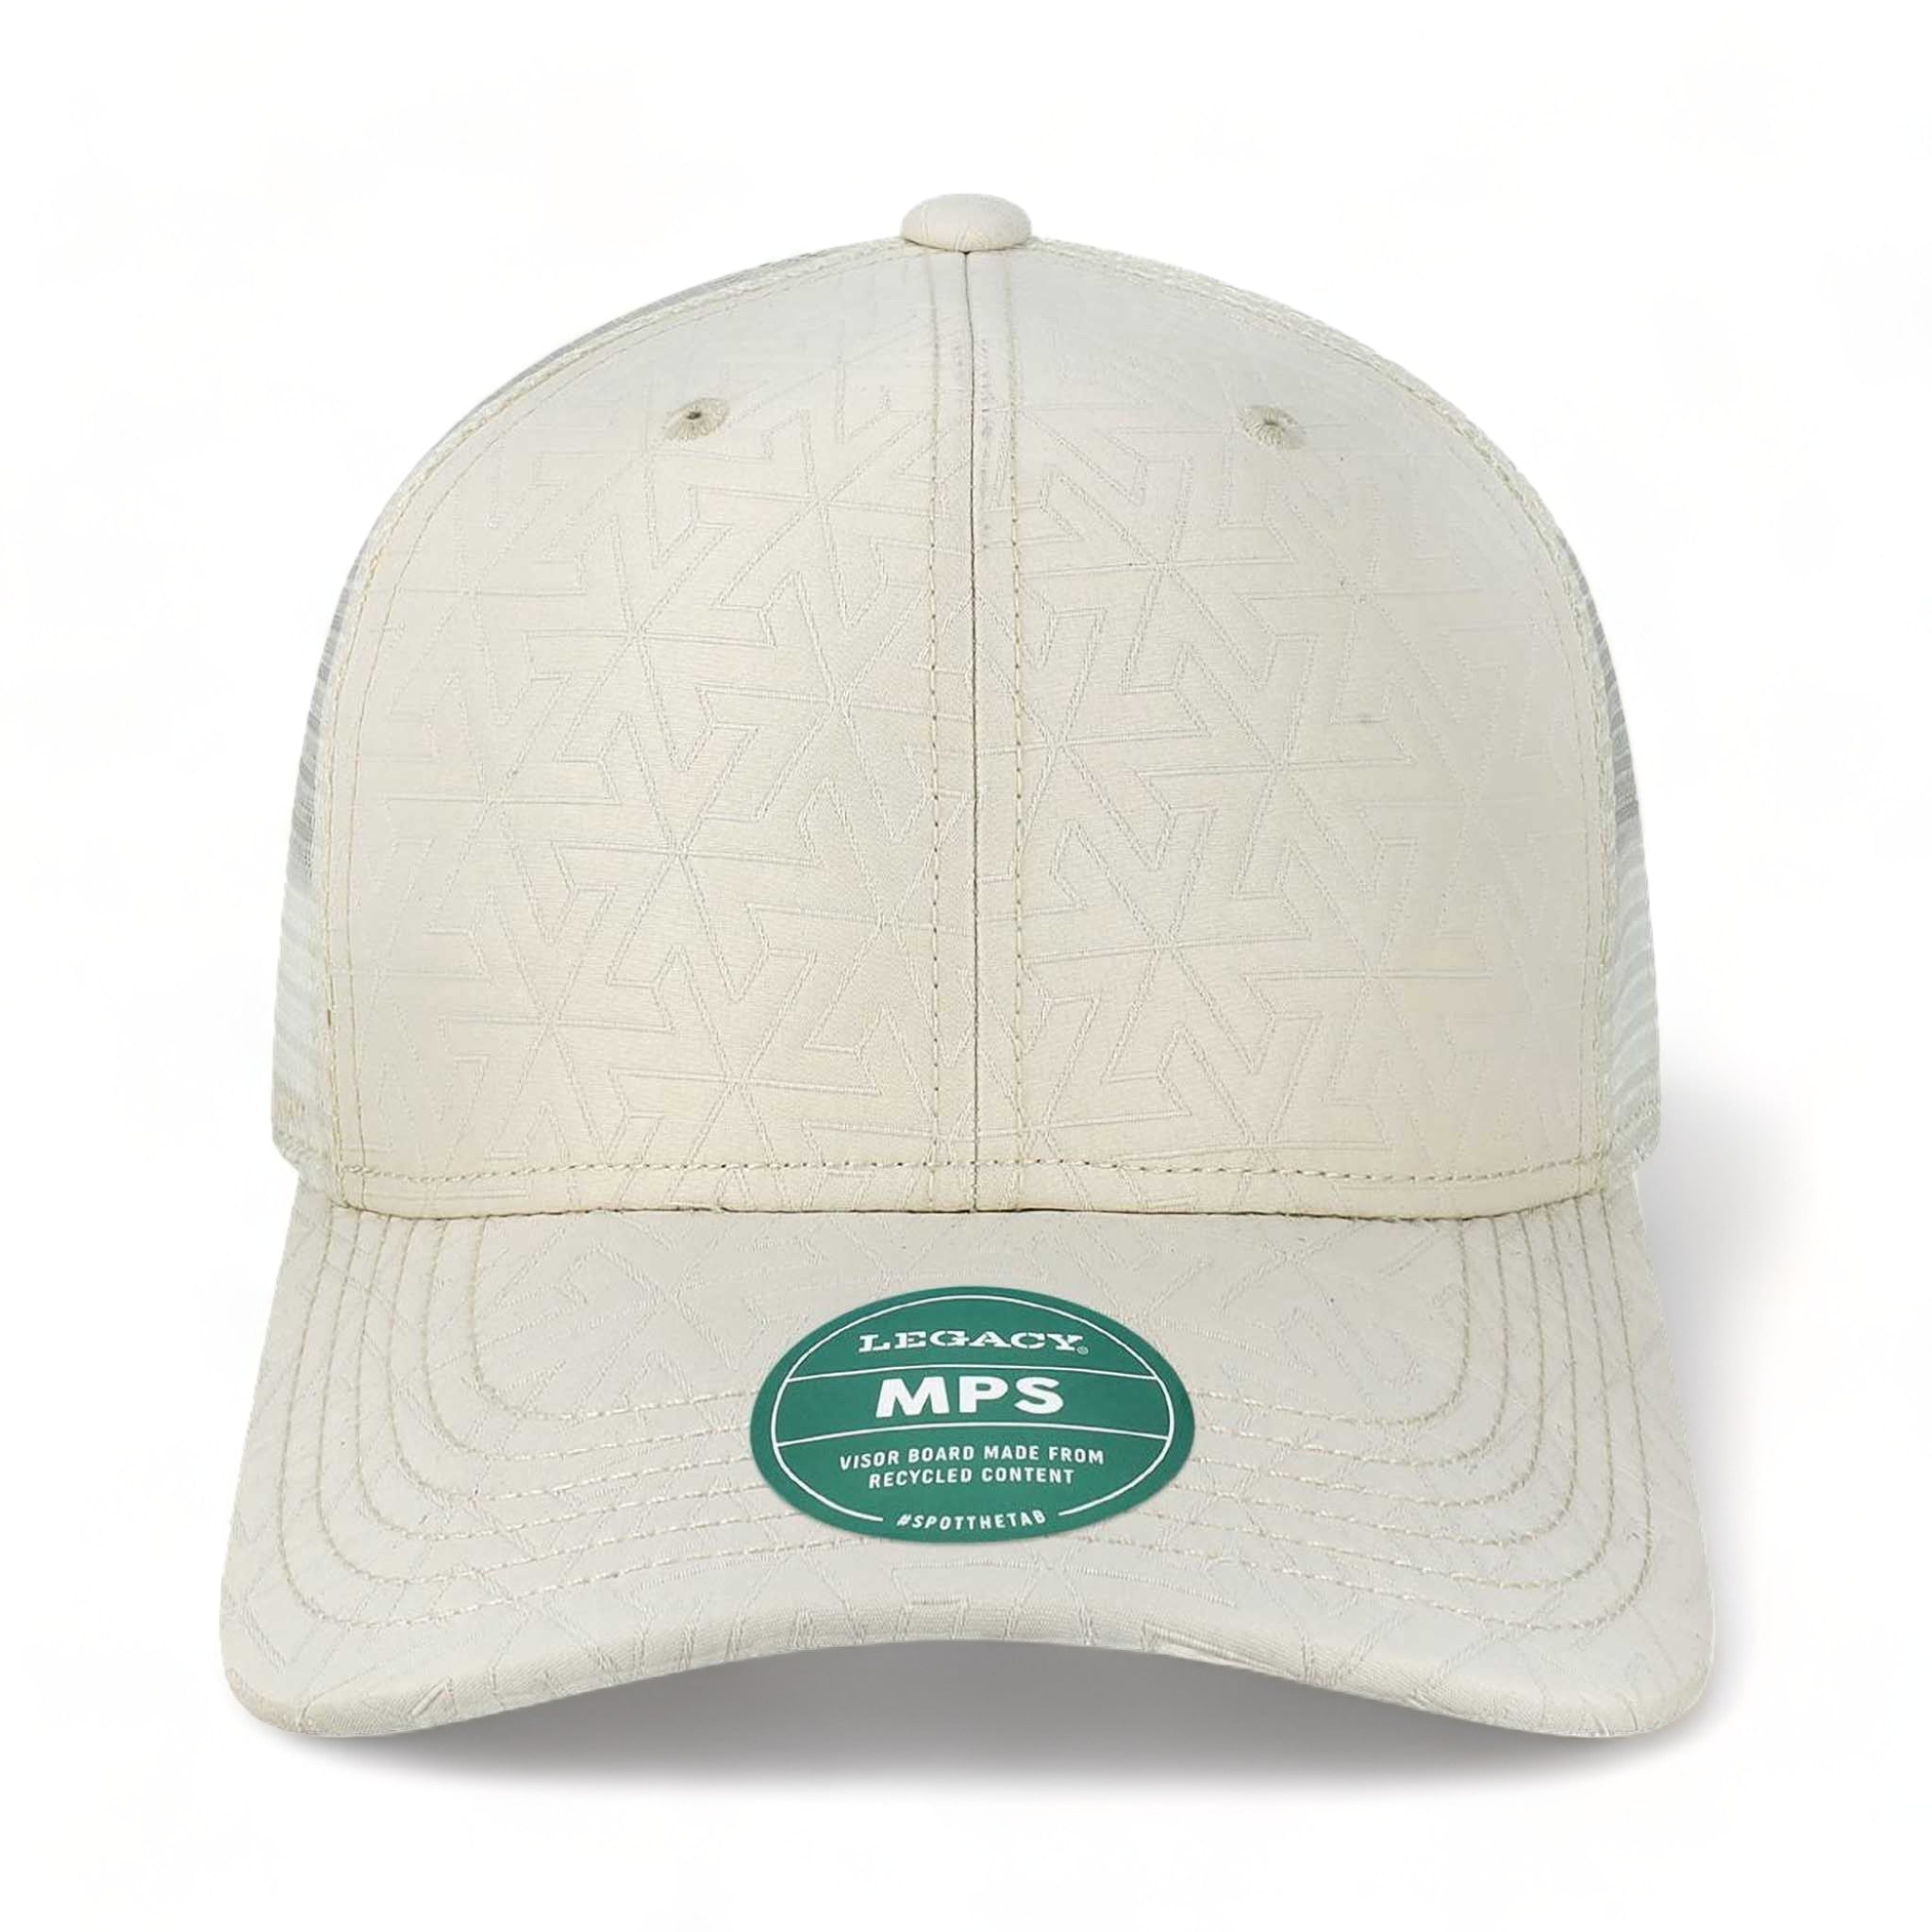 Front view of LEGACY MPS custom hat in white z - quilted